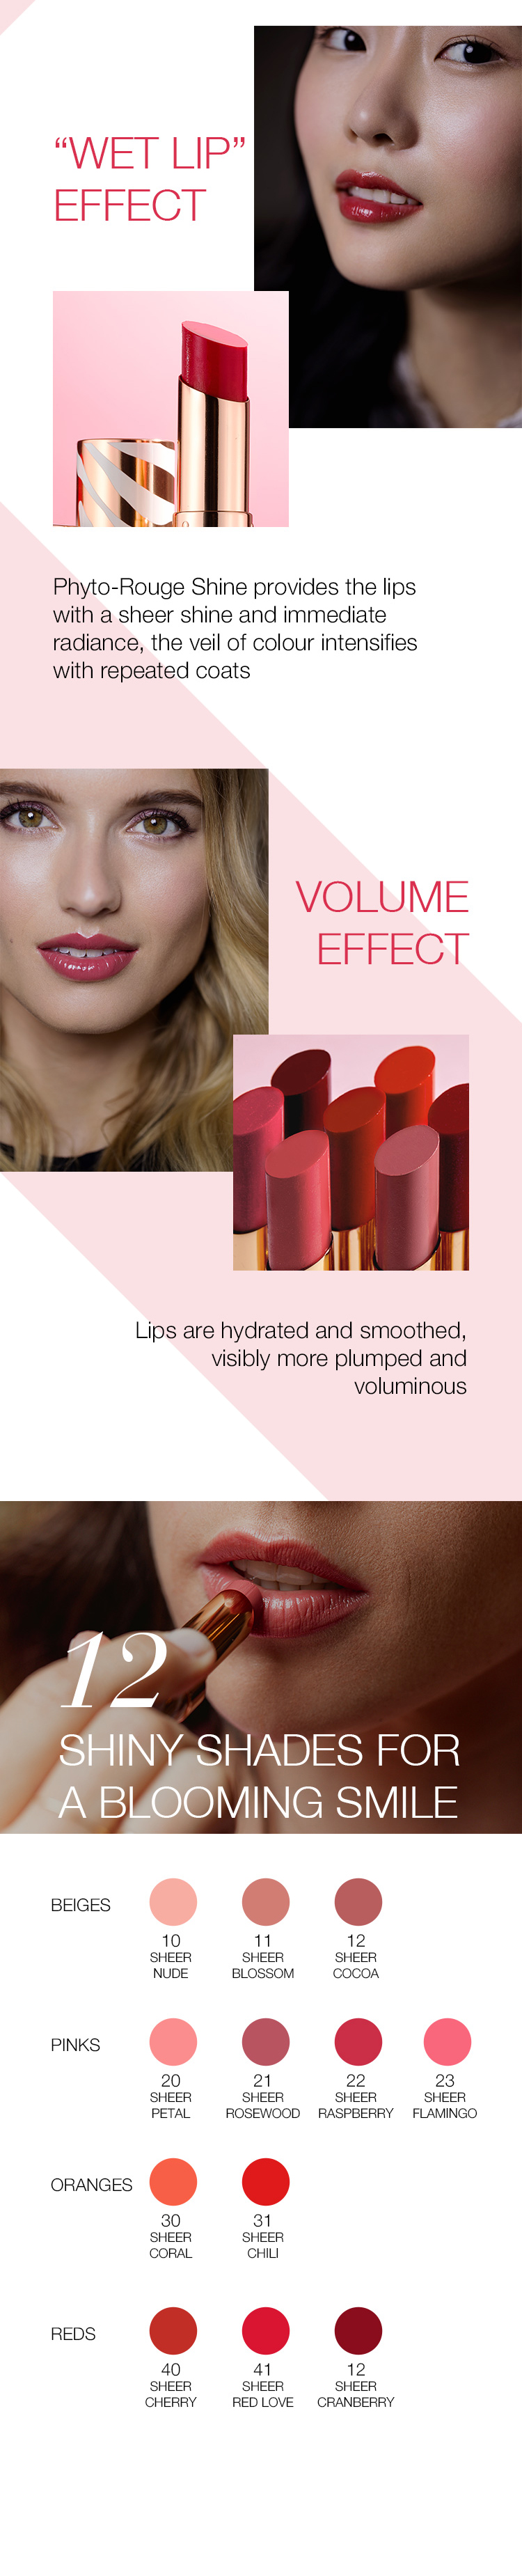 NEW Phyto-Rouge Shine -Shiny shades for a blooming smile - Sisley Paris